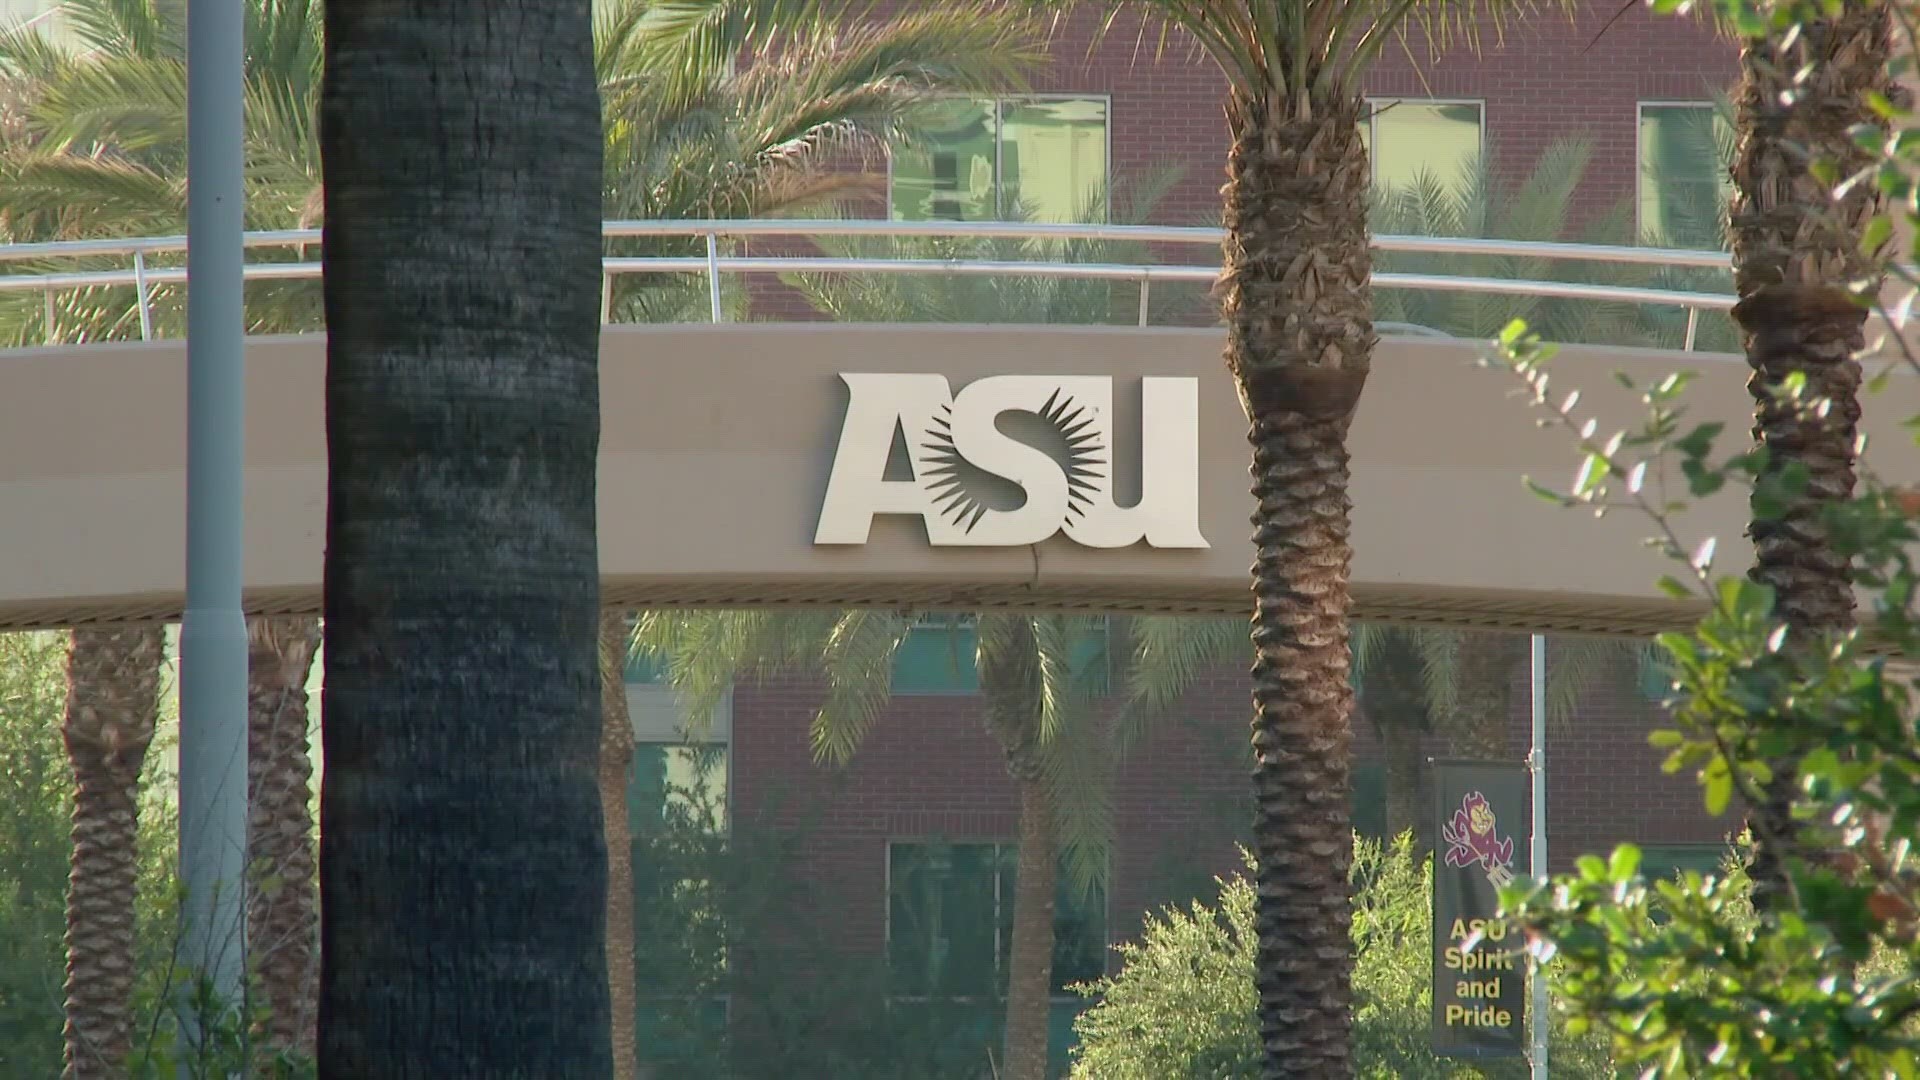 This is the largest incoming Fall class ASU has ever seen in its history with about 145,000 students enrolled, about 80K of those expected to be on-campus.